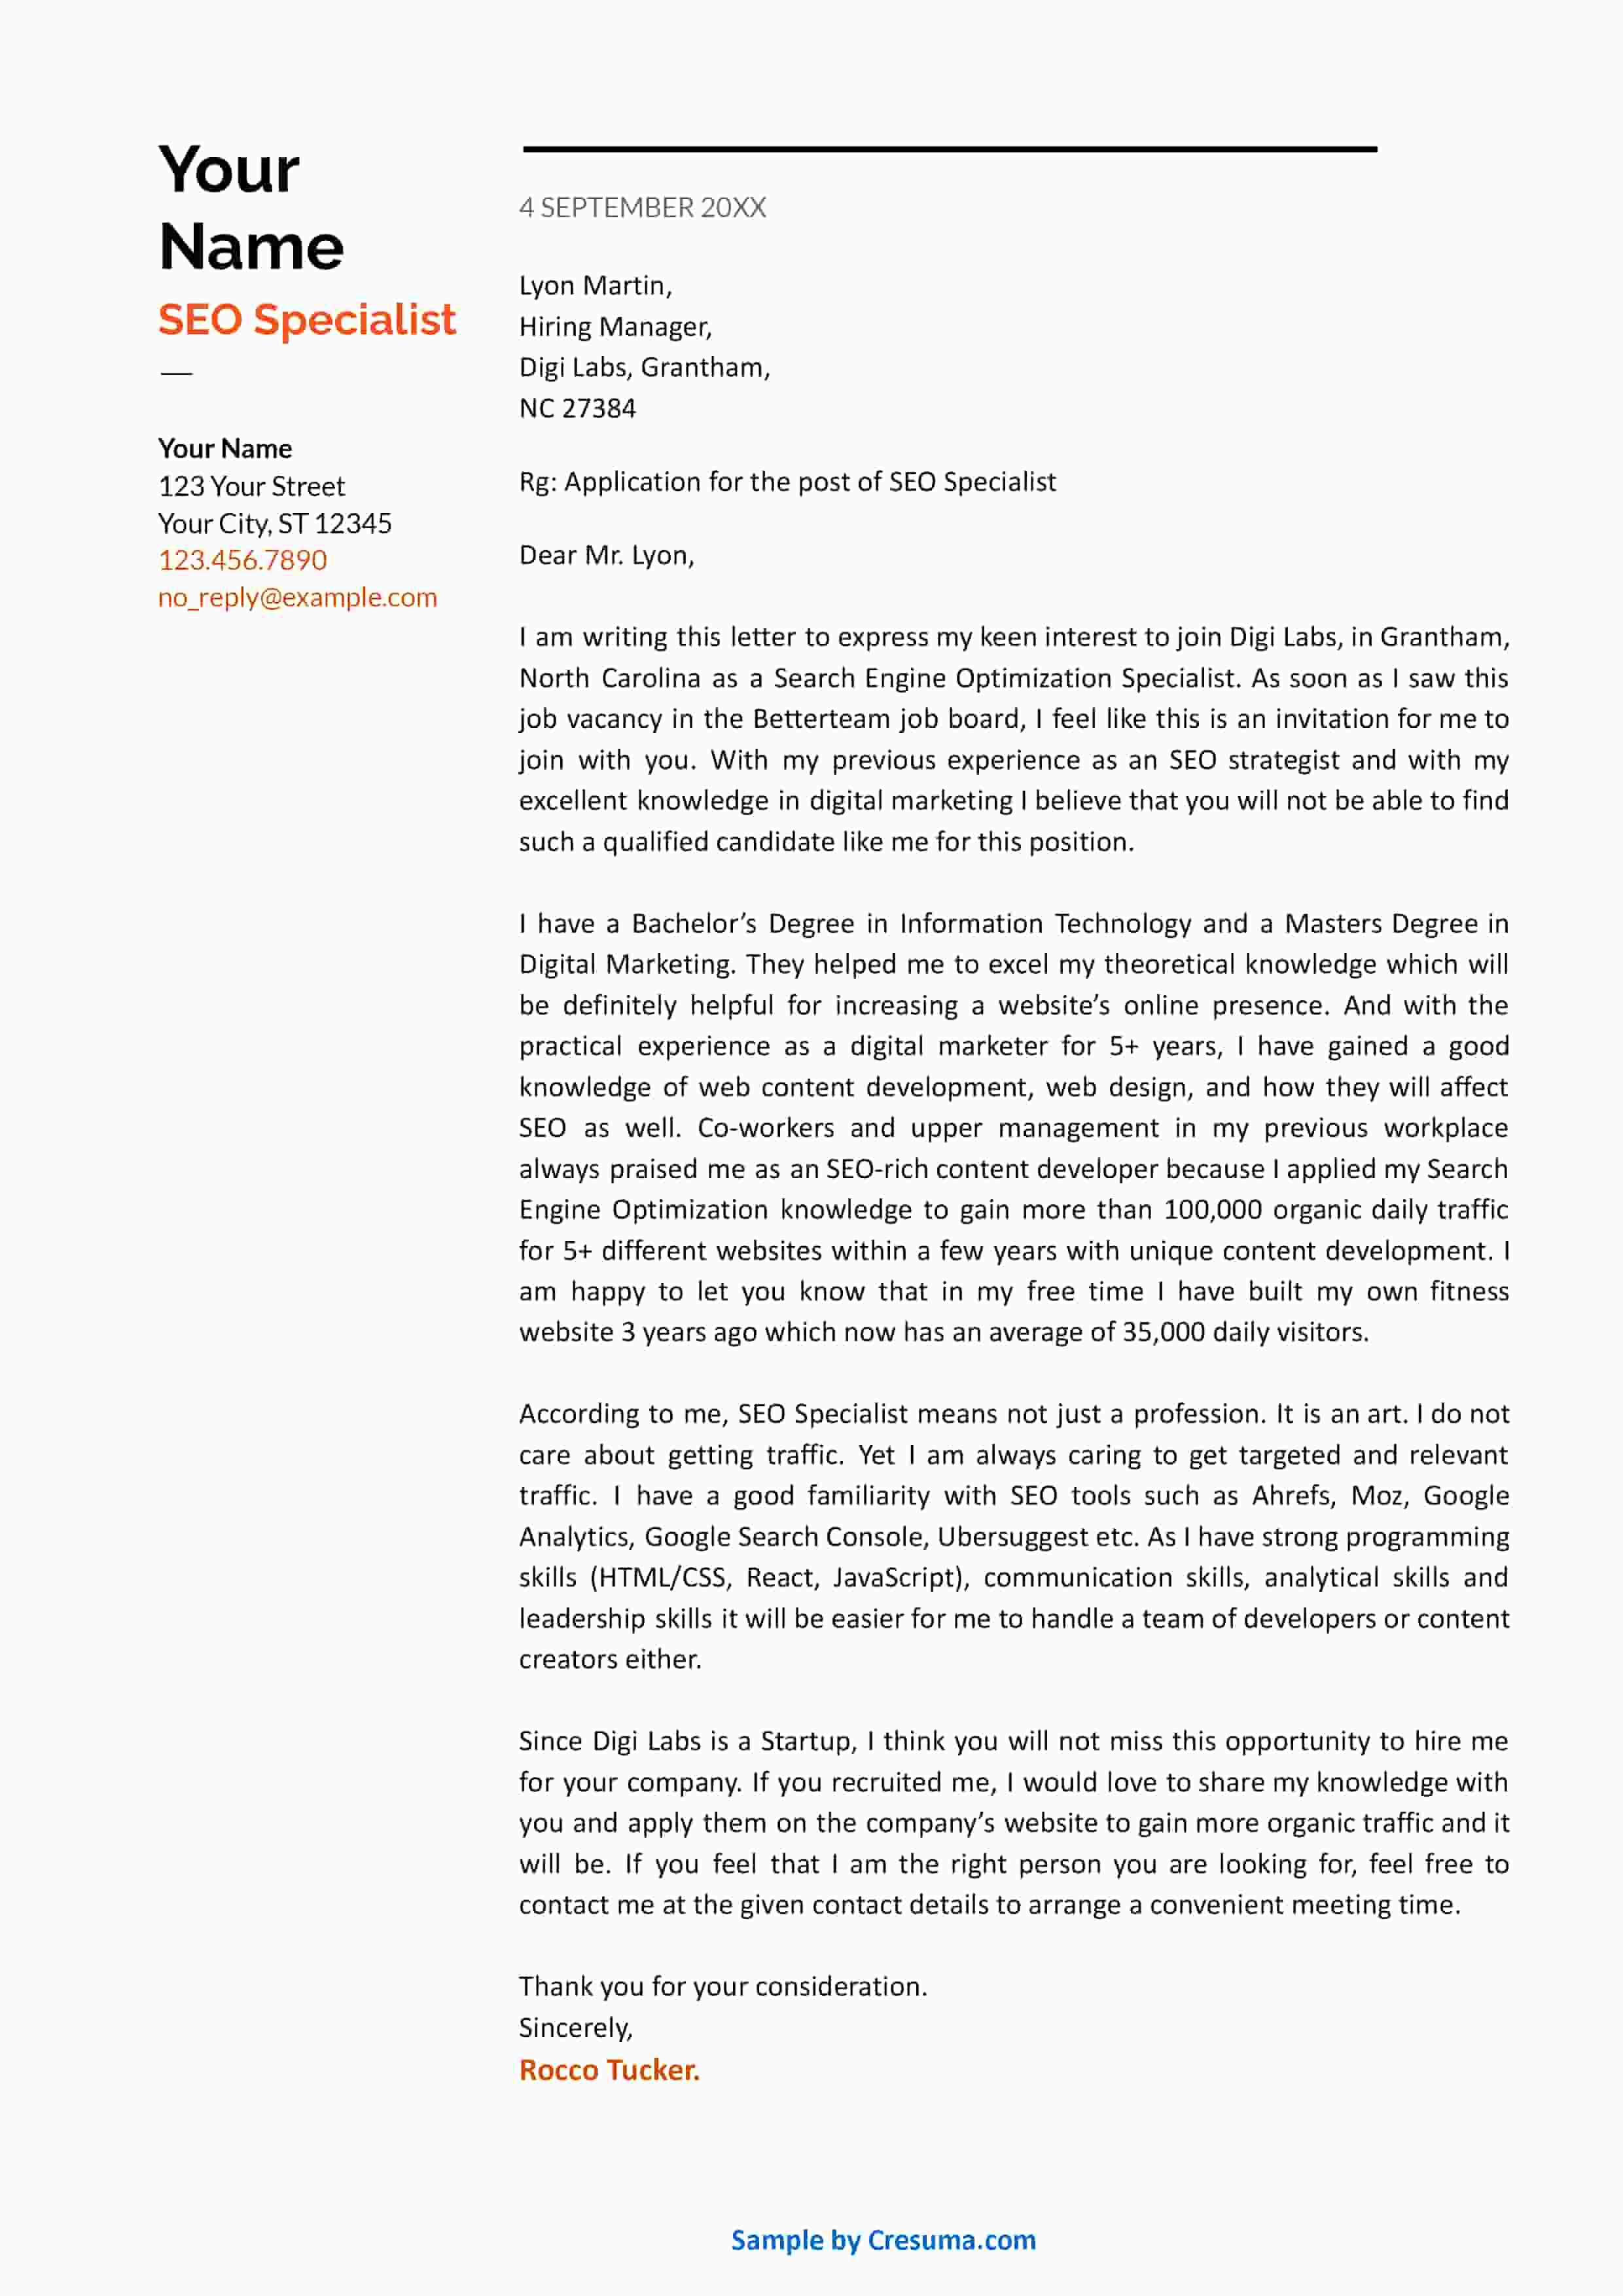 SEO Specialist cover letter example template 1